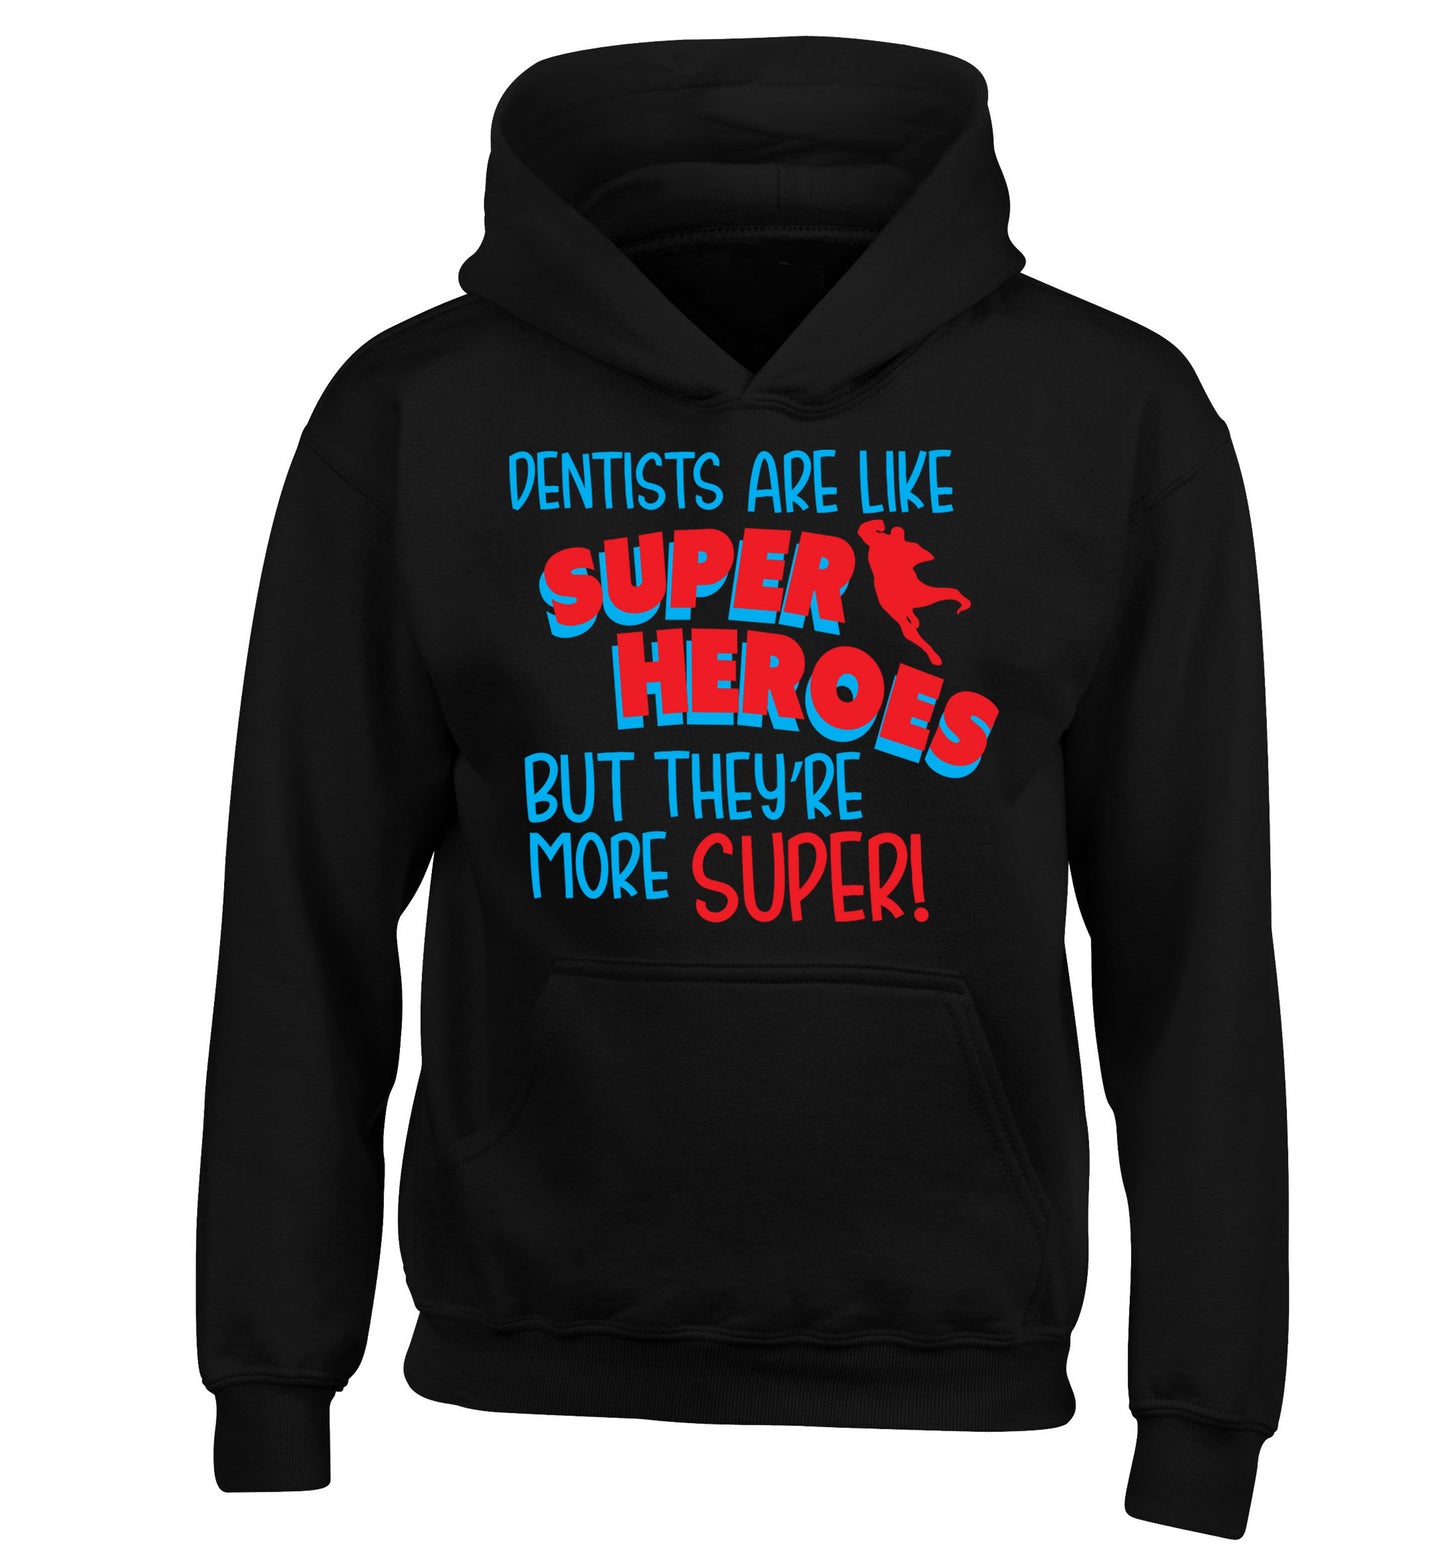 Dentists are like superheros but they're more super children's black hoodie 12-13 Years